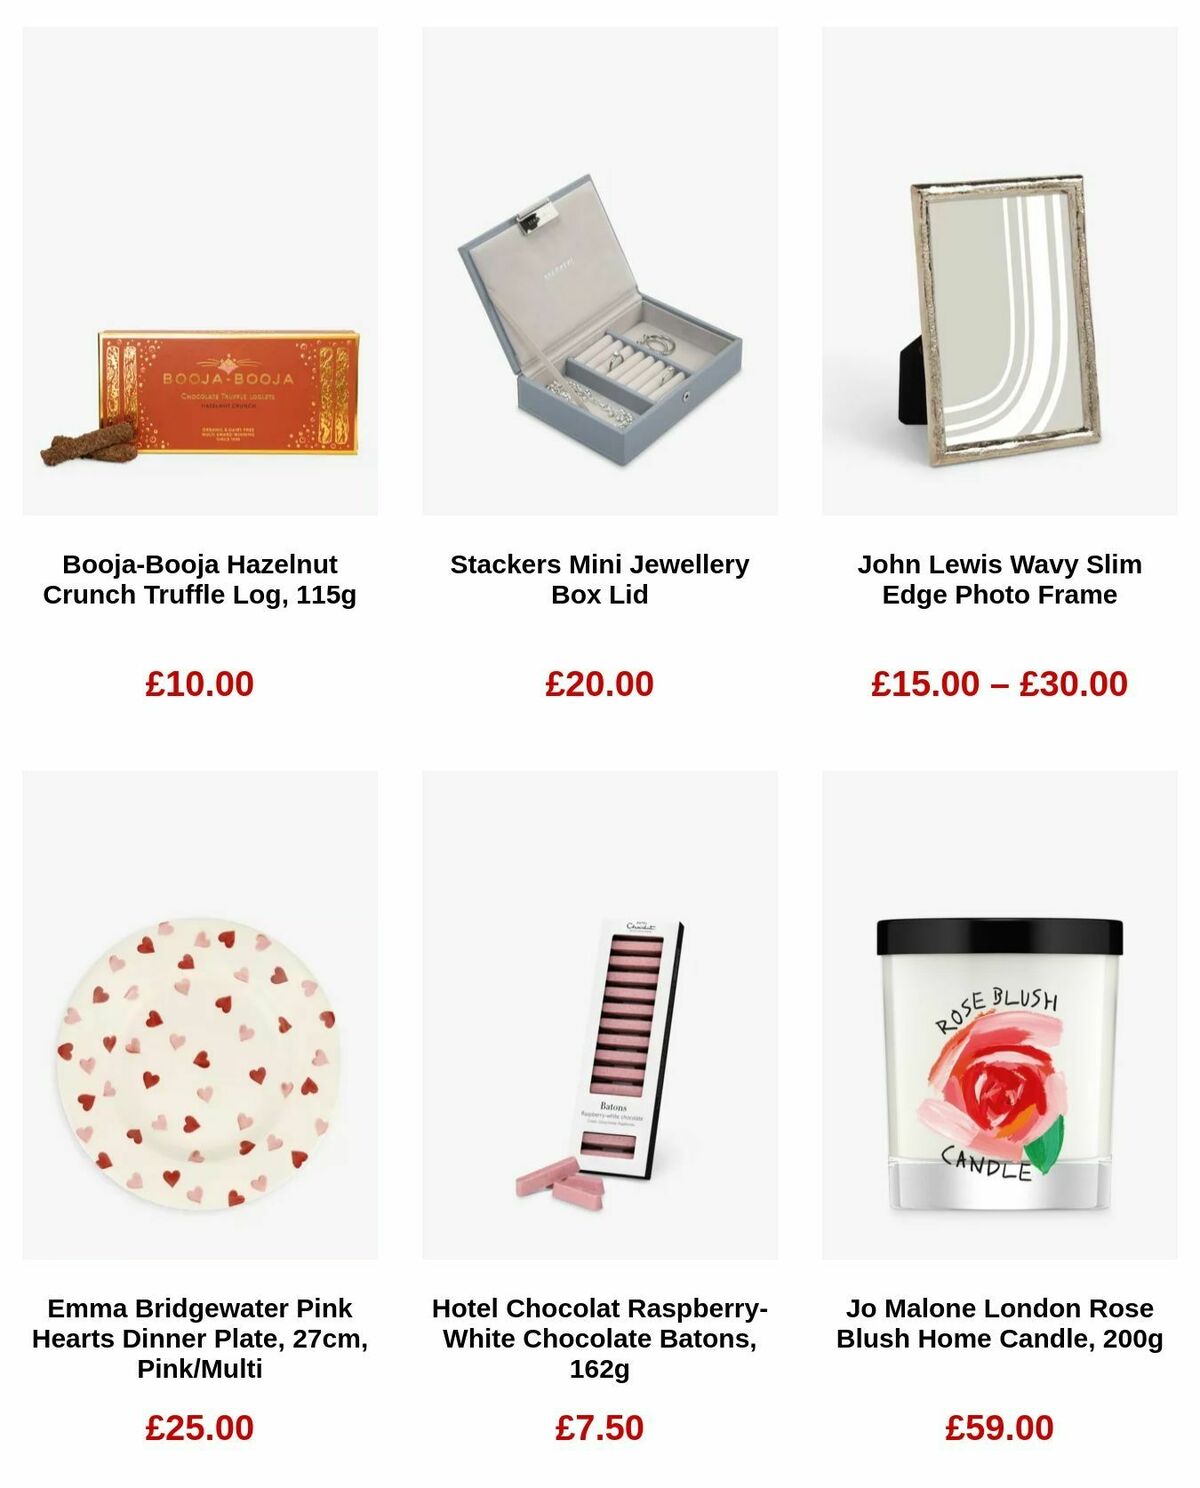 John Lewis Valentine's Day Offers from 25 January